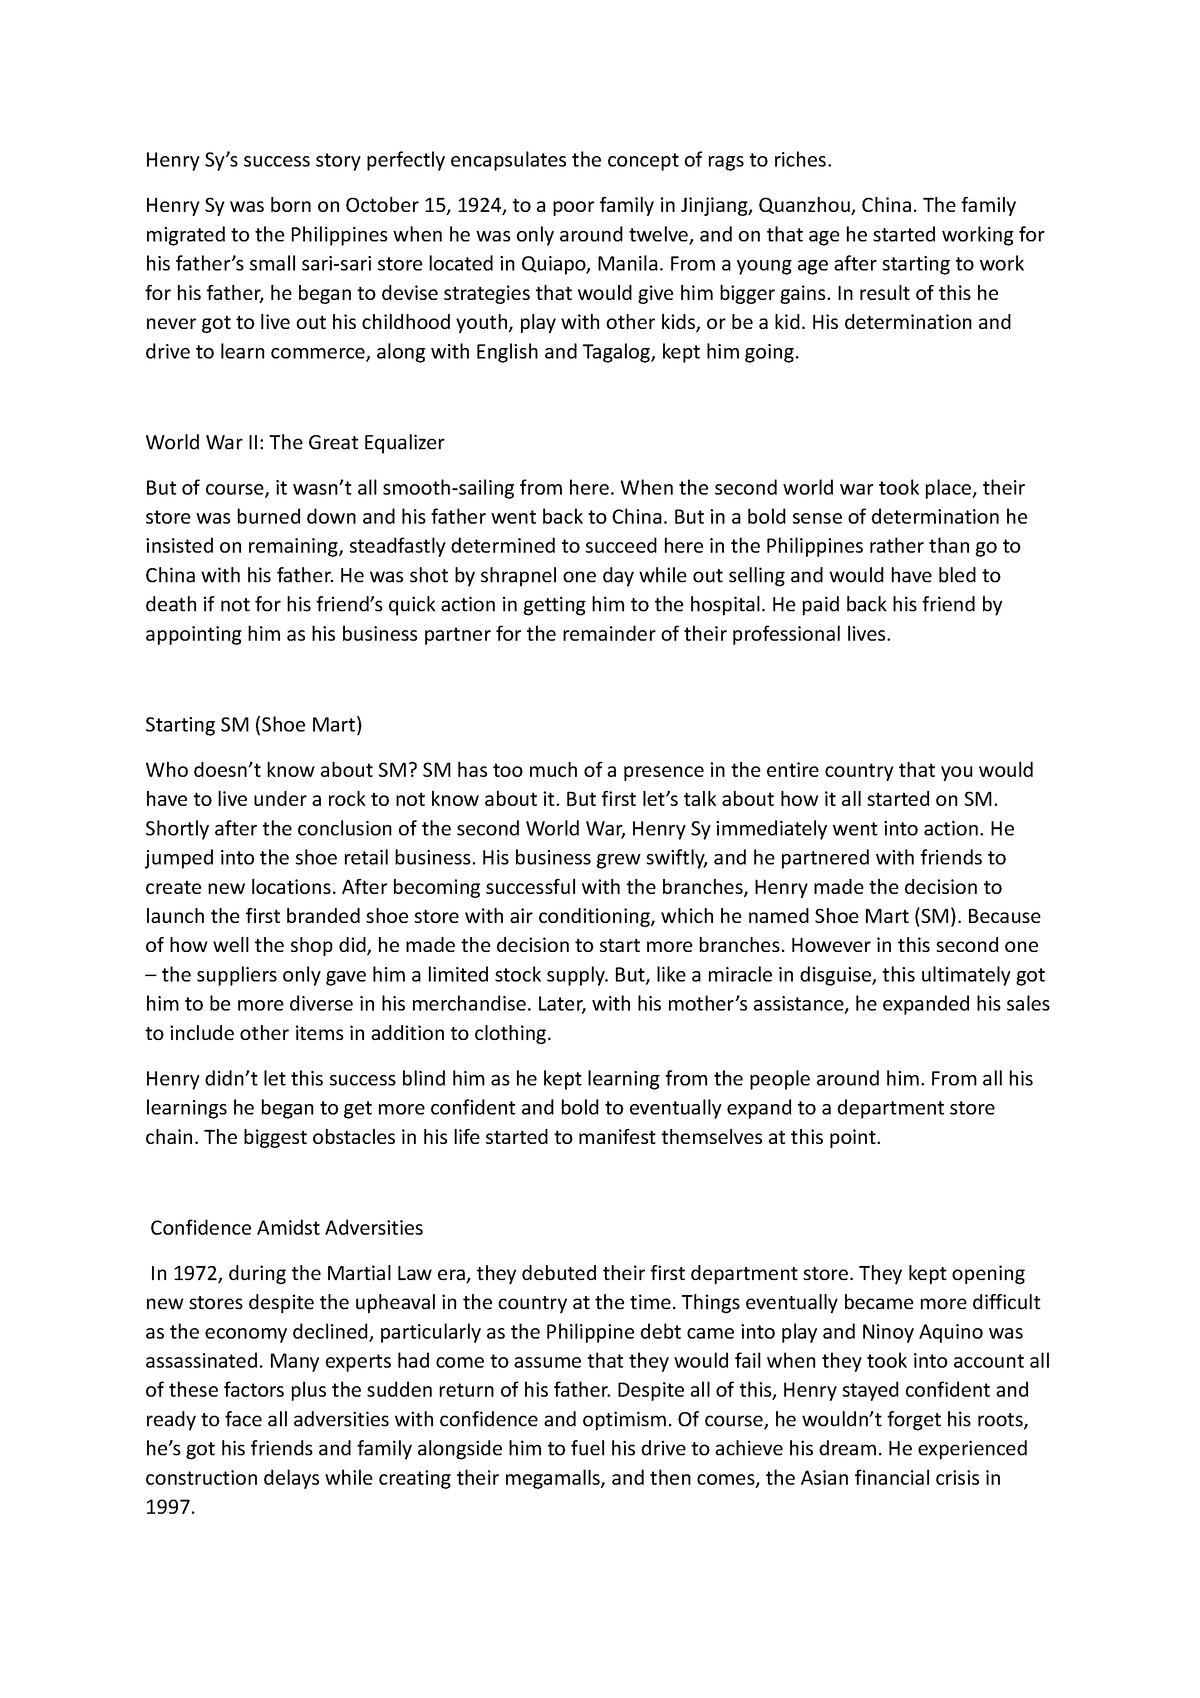 Case-study-2 - a case study tackling about the life of henry sy and his ...